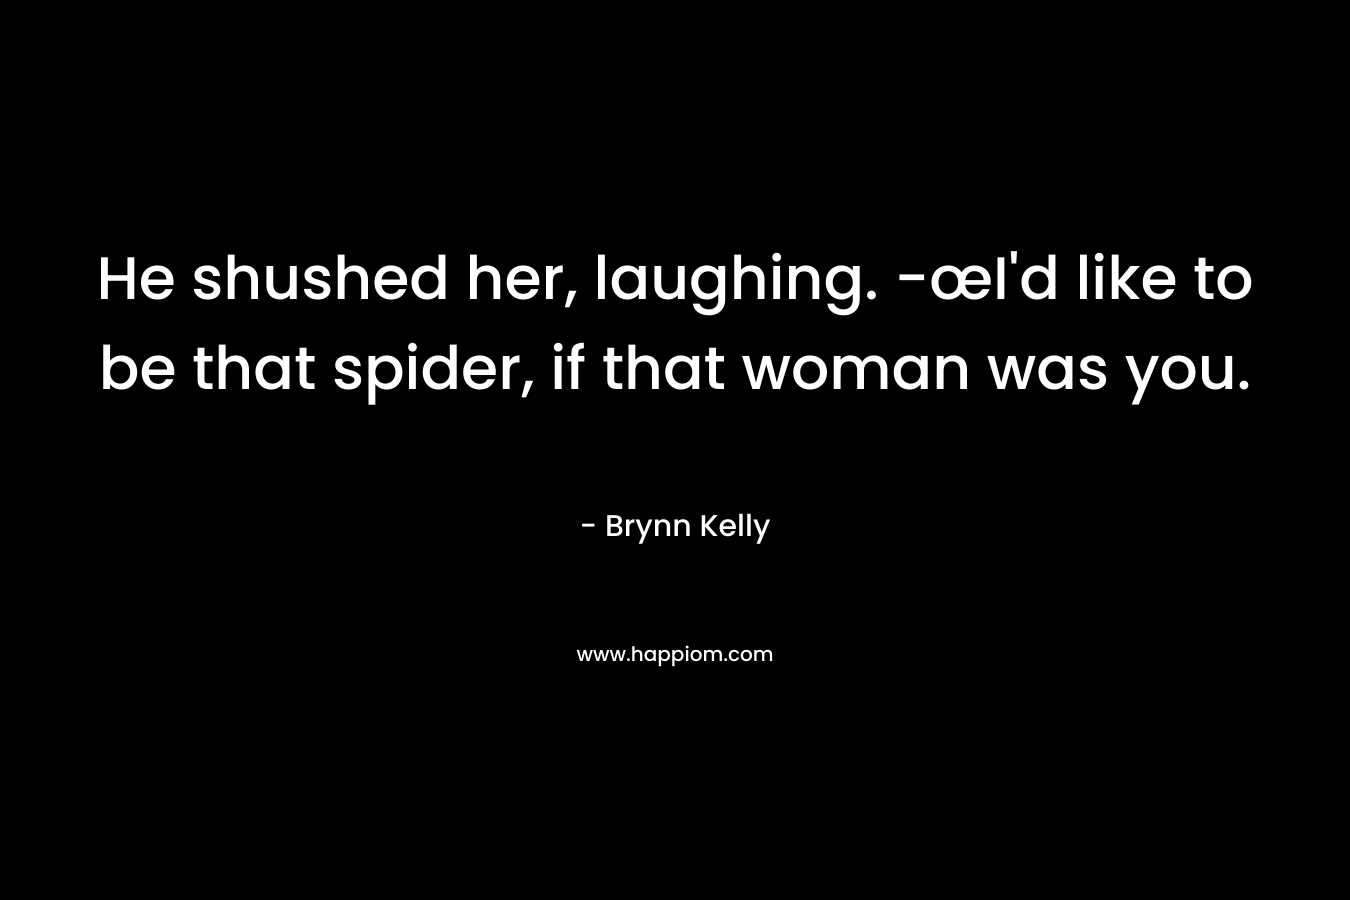 He shushed her, laughing. -œI’d like to be that spider, if that woman was you. – Brynn Kelly